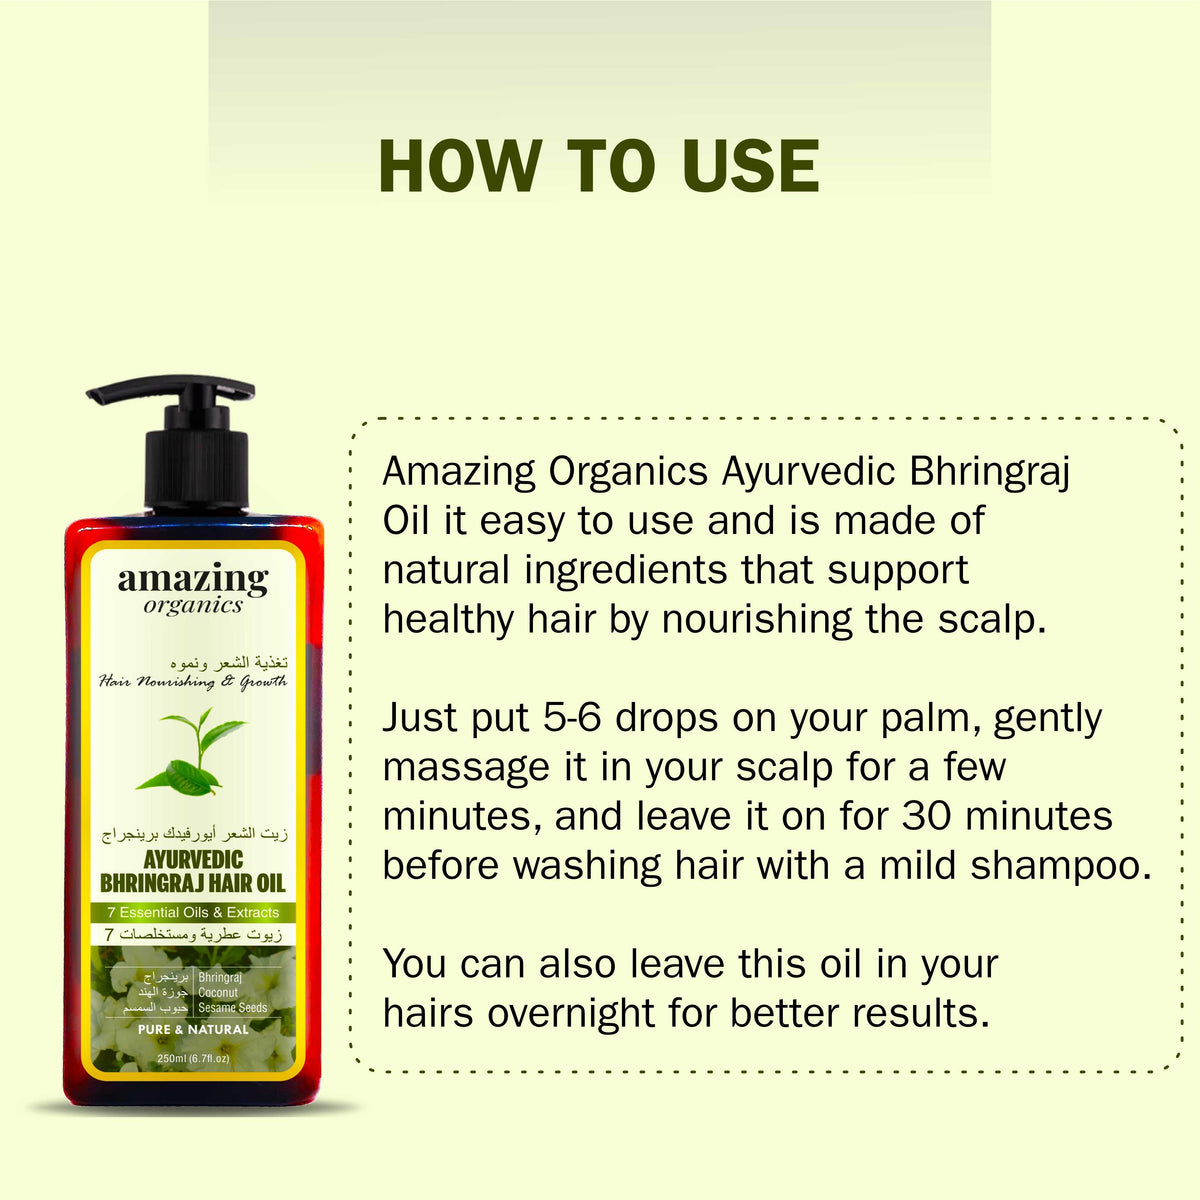 10 Bhringraj Oil benefits that will change your hair.